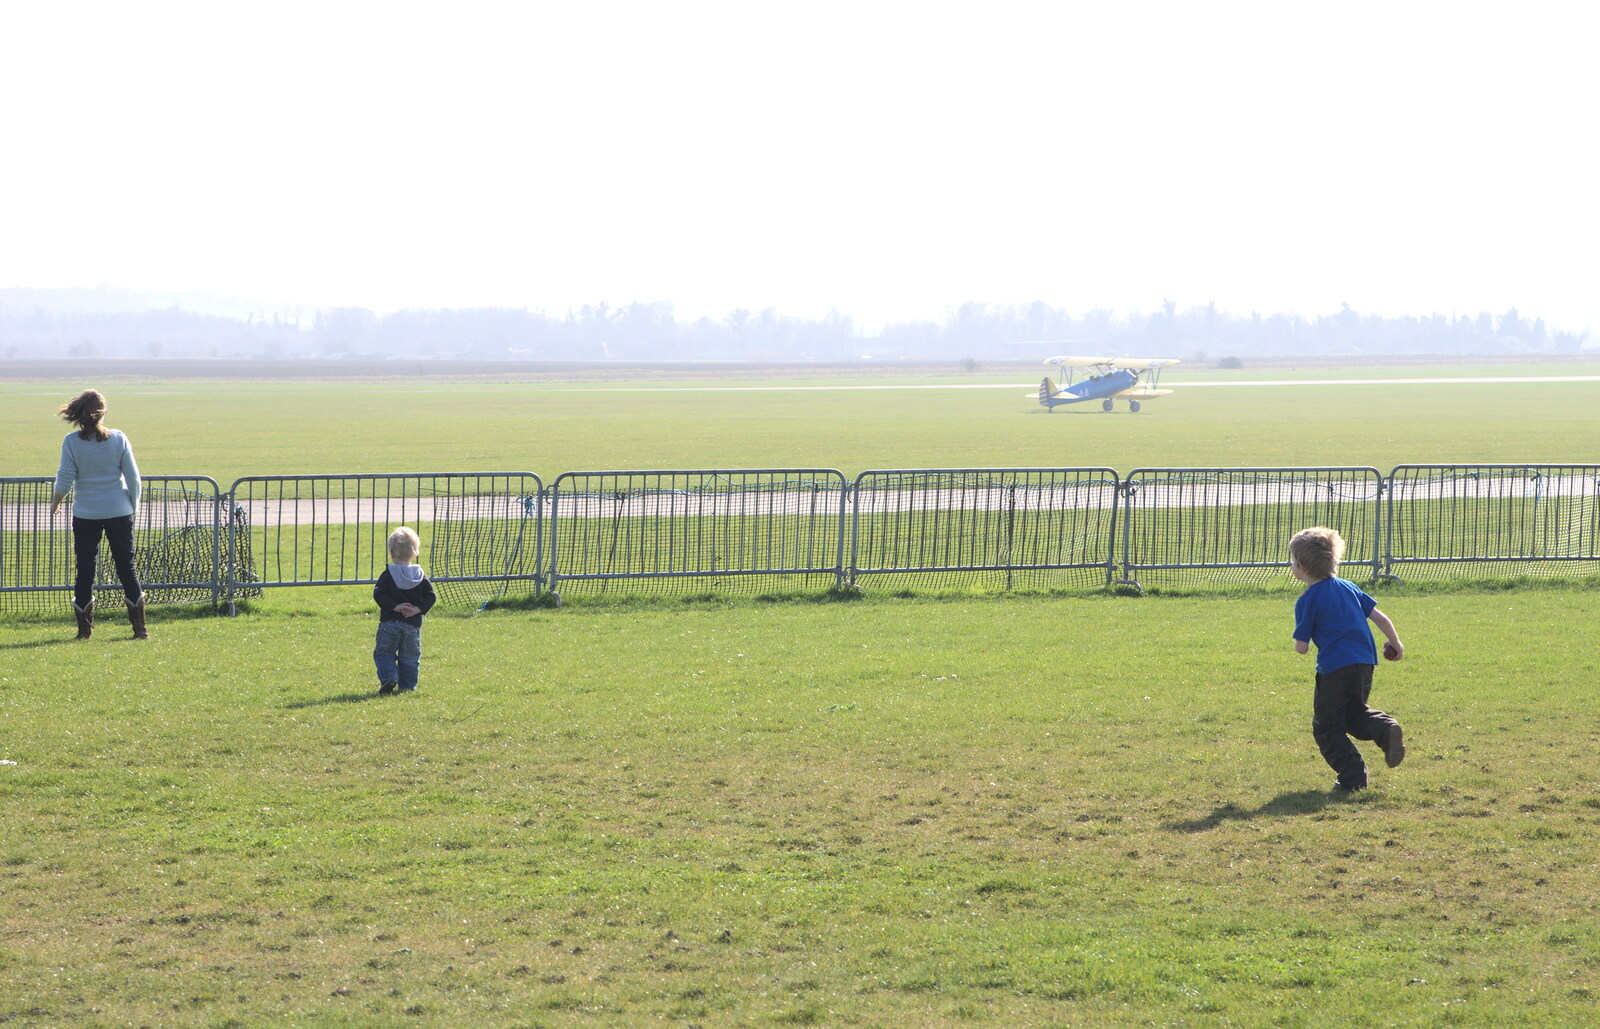 The Stearman lands as Fred runs around from A Day Out at Duxford, Cambridgeshire - 9th March 2014